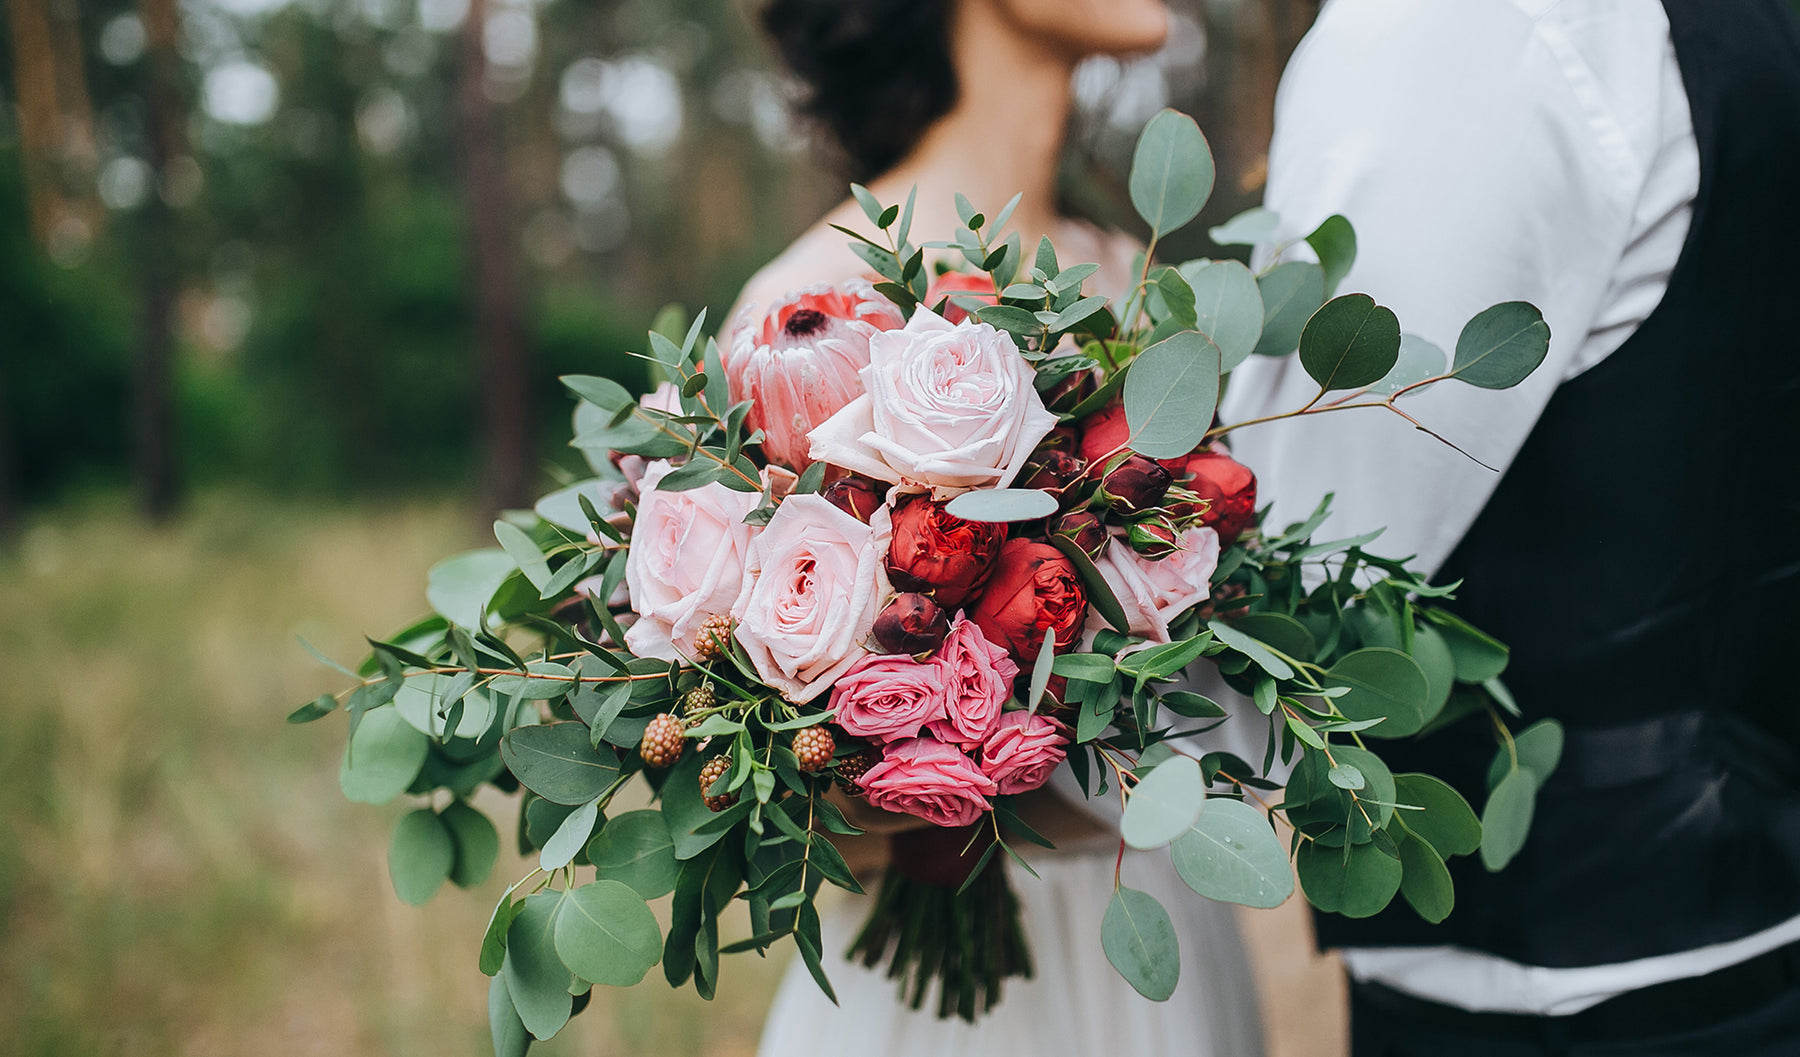 Say "I Do" to Artificial Flowers: How To Make a Wedding Bouquet With Artificial Flowers